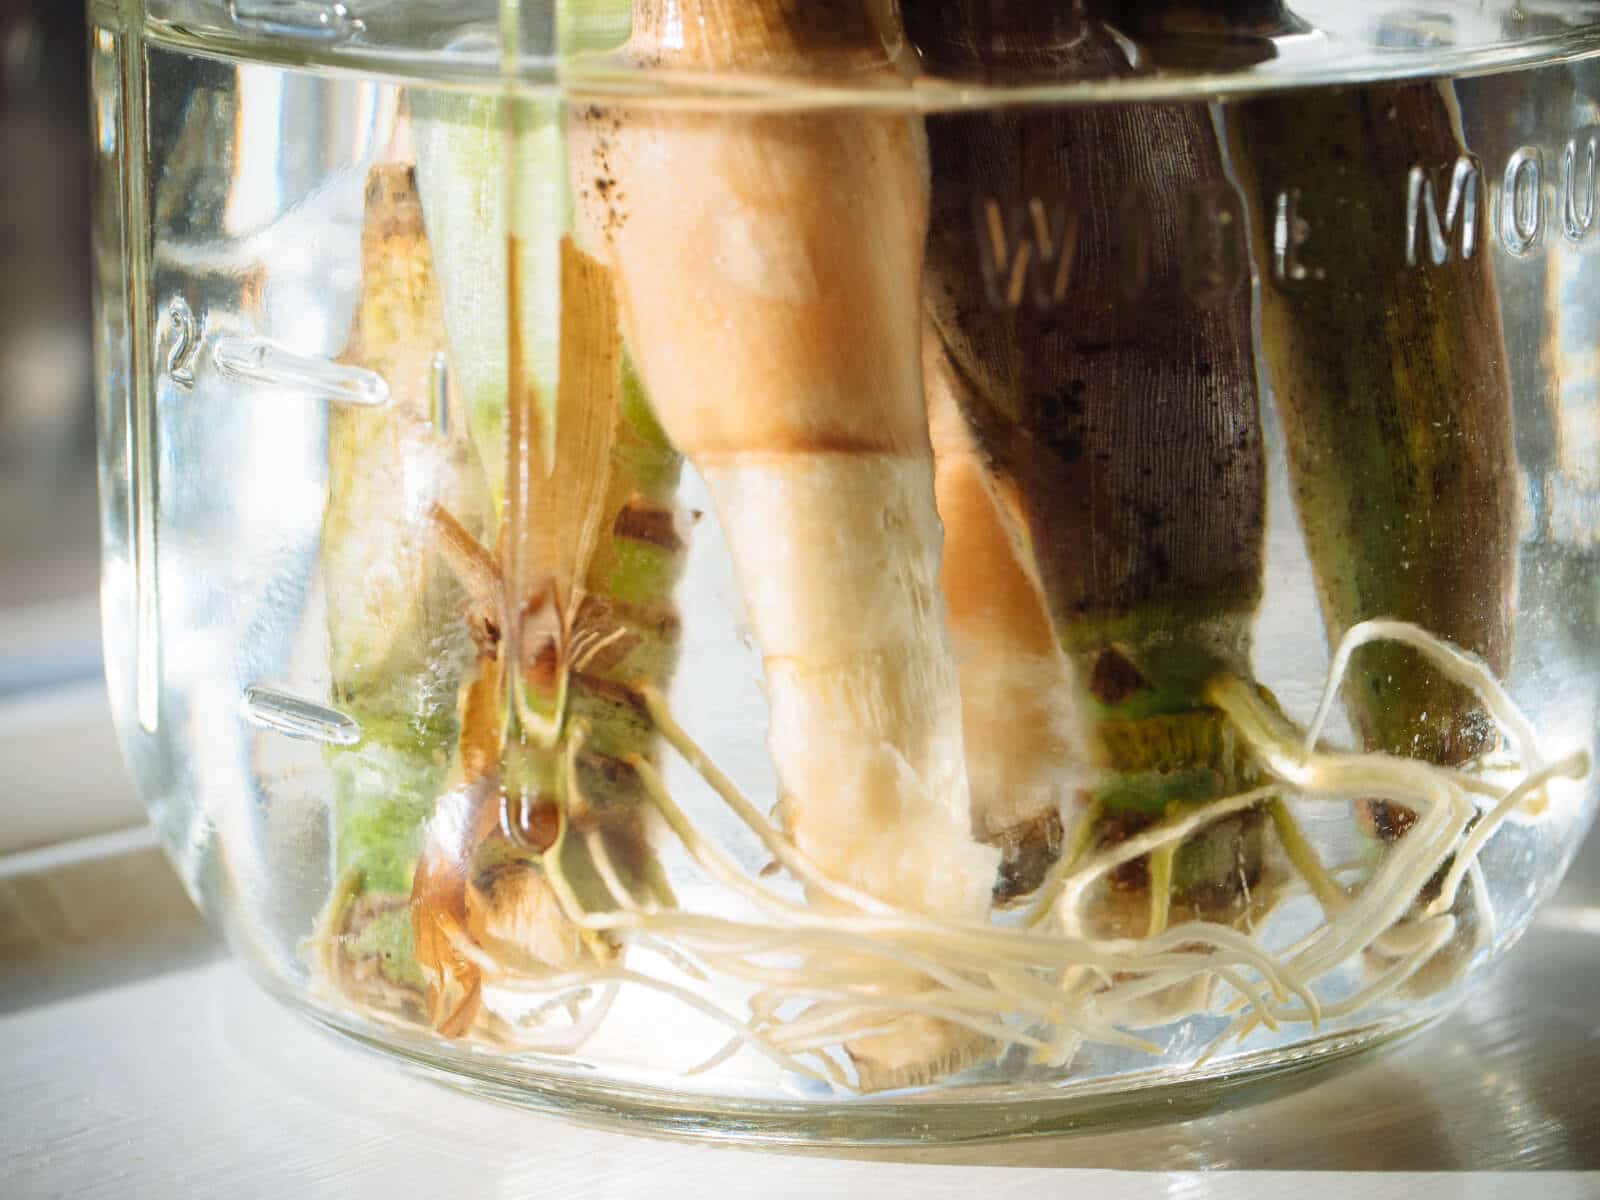 Roots growing in water